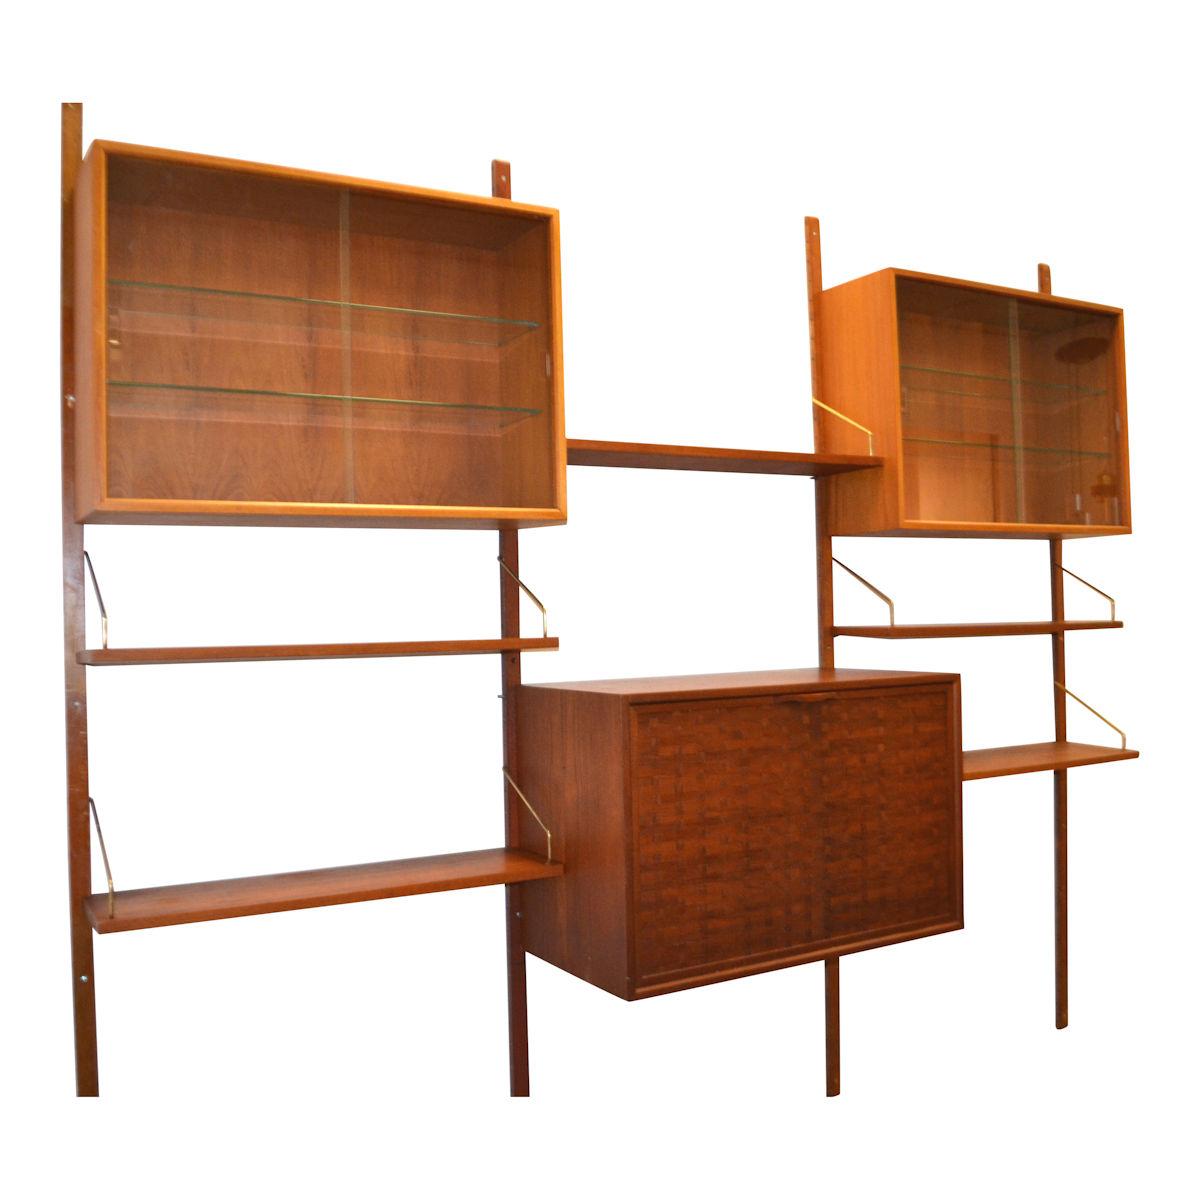 Vintage Danish teak shelving system designed by Poul Cadovius for Cado. Cadovius, the architect and furniture designer, became world-famous with his mythical Royal System design. Even today, this practical, efficient, stylish wall system still is a